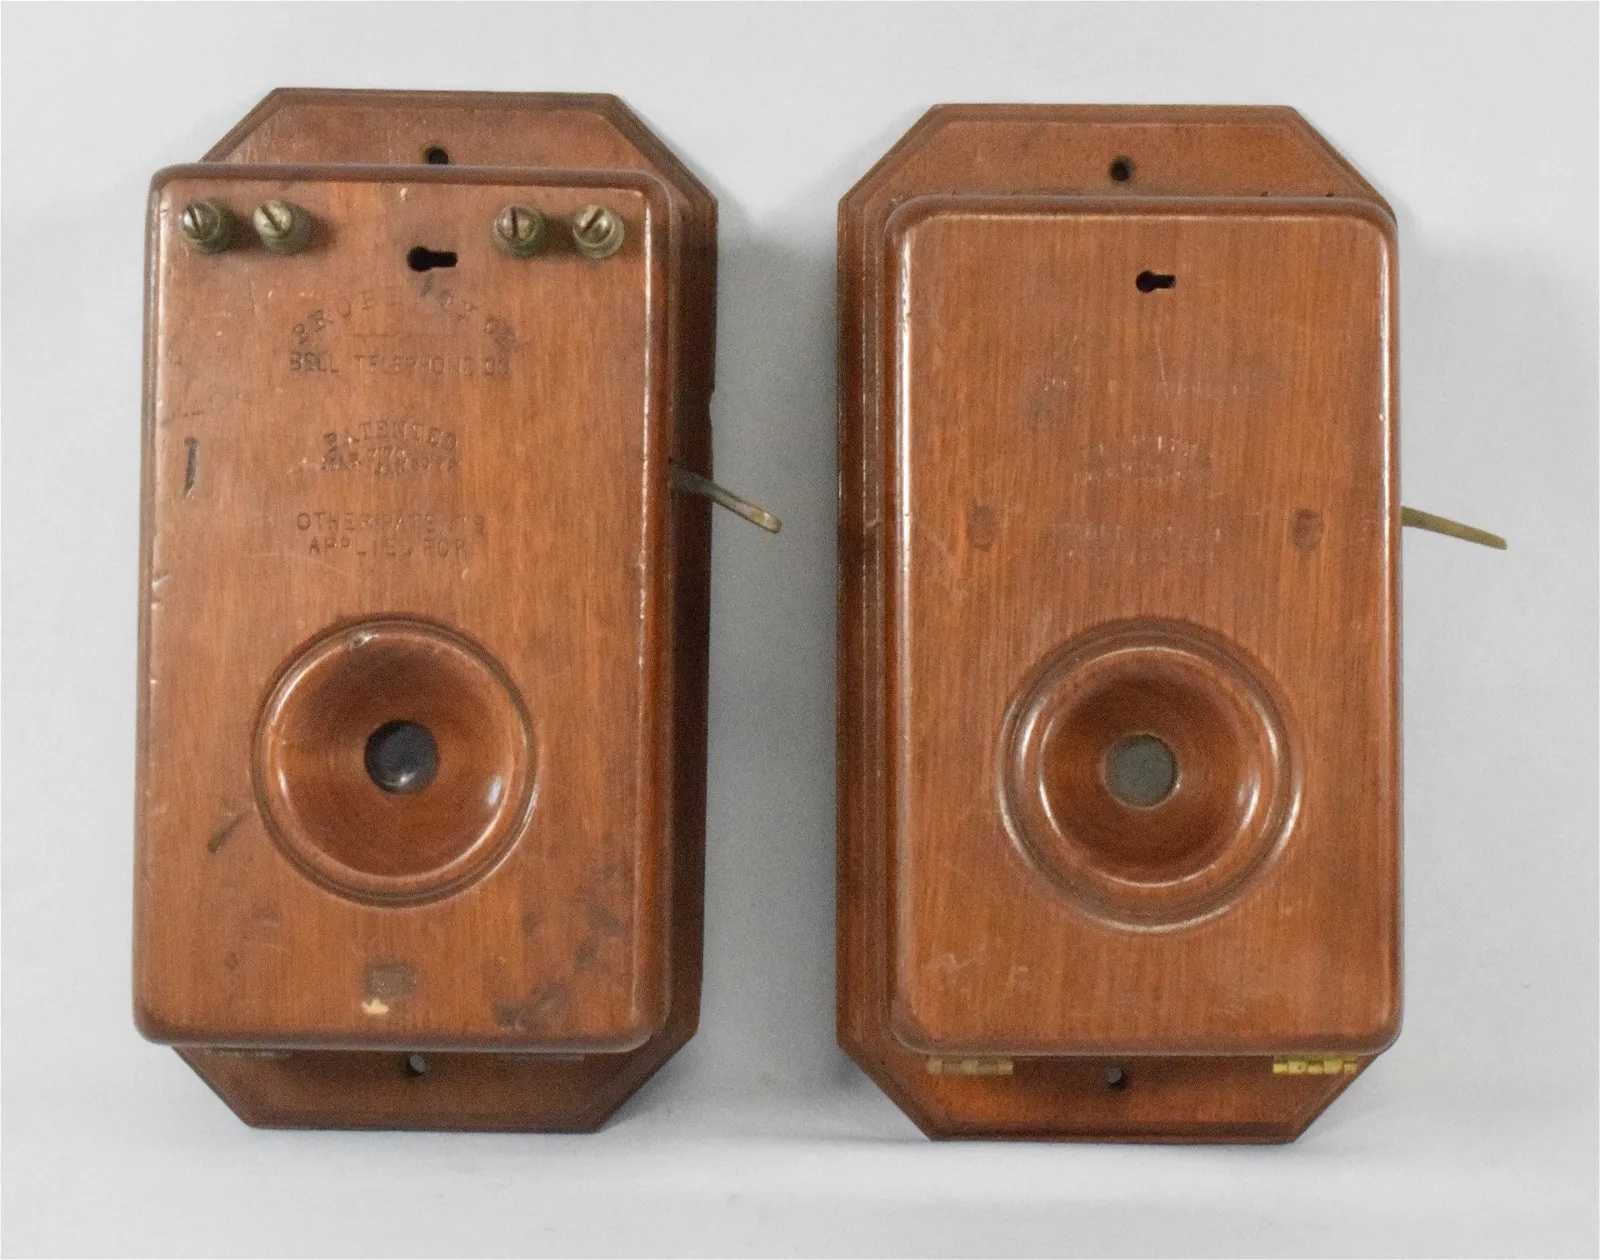 Bell Telephone Wooden Transmitters, which sold for $36,000 ($45,720 with buyer’s premium) at White's Auctions.